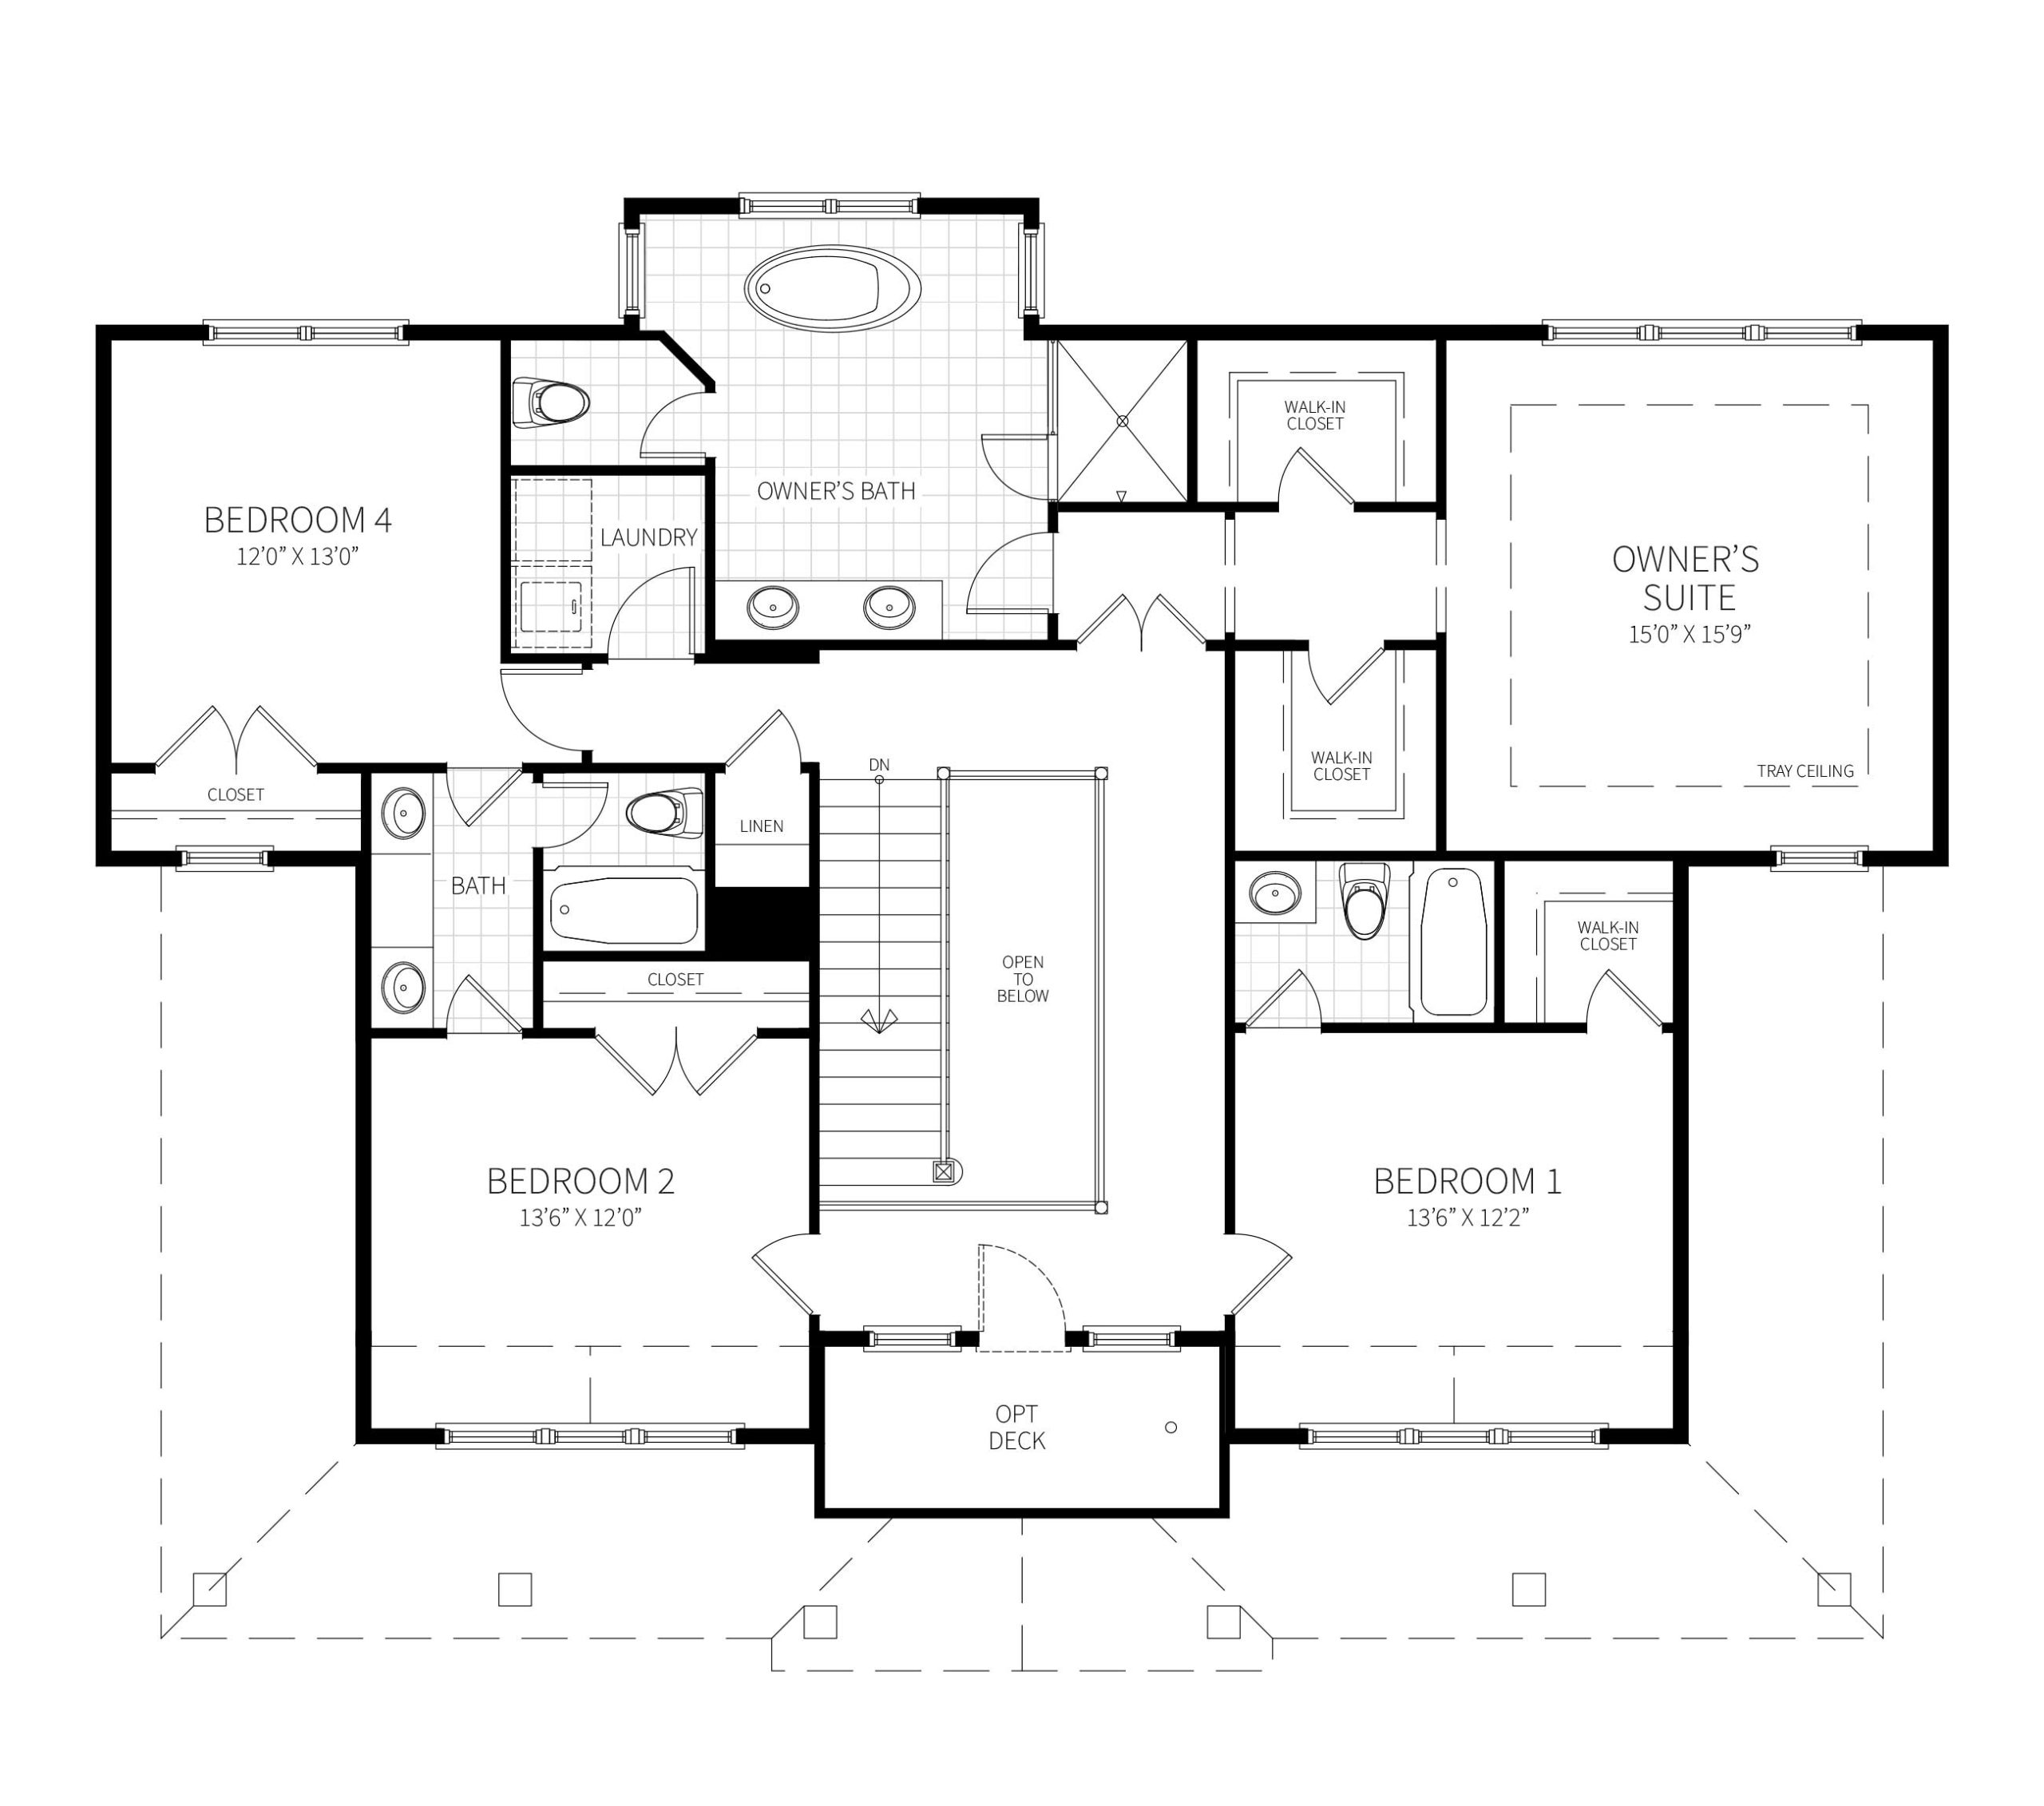 The second floor plan of the Rosedale, featuring four bedrooms, each with direct bathroom access.